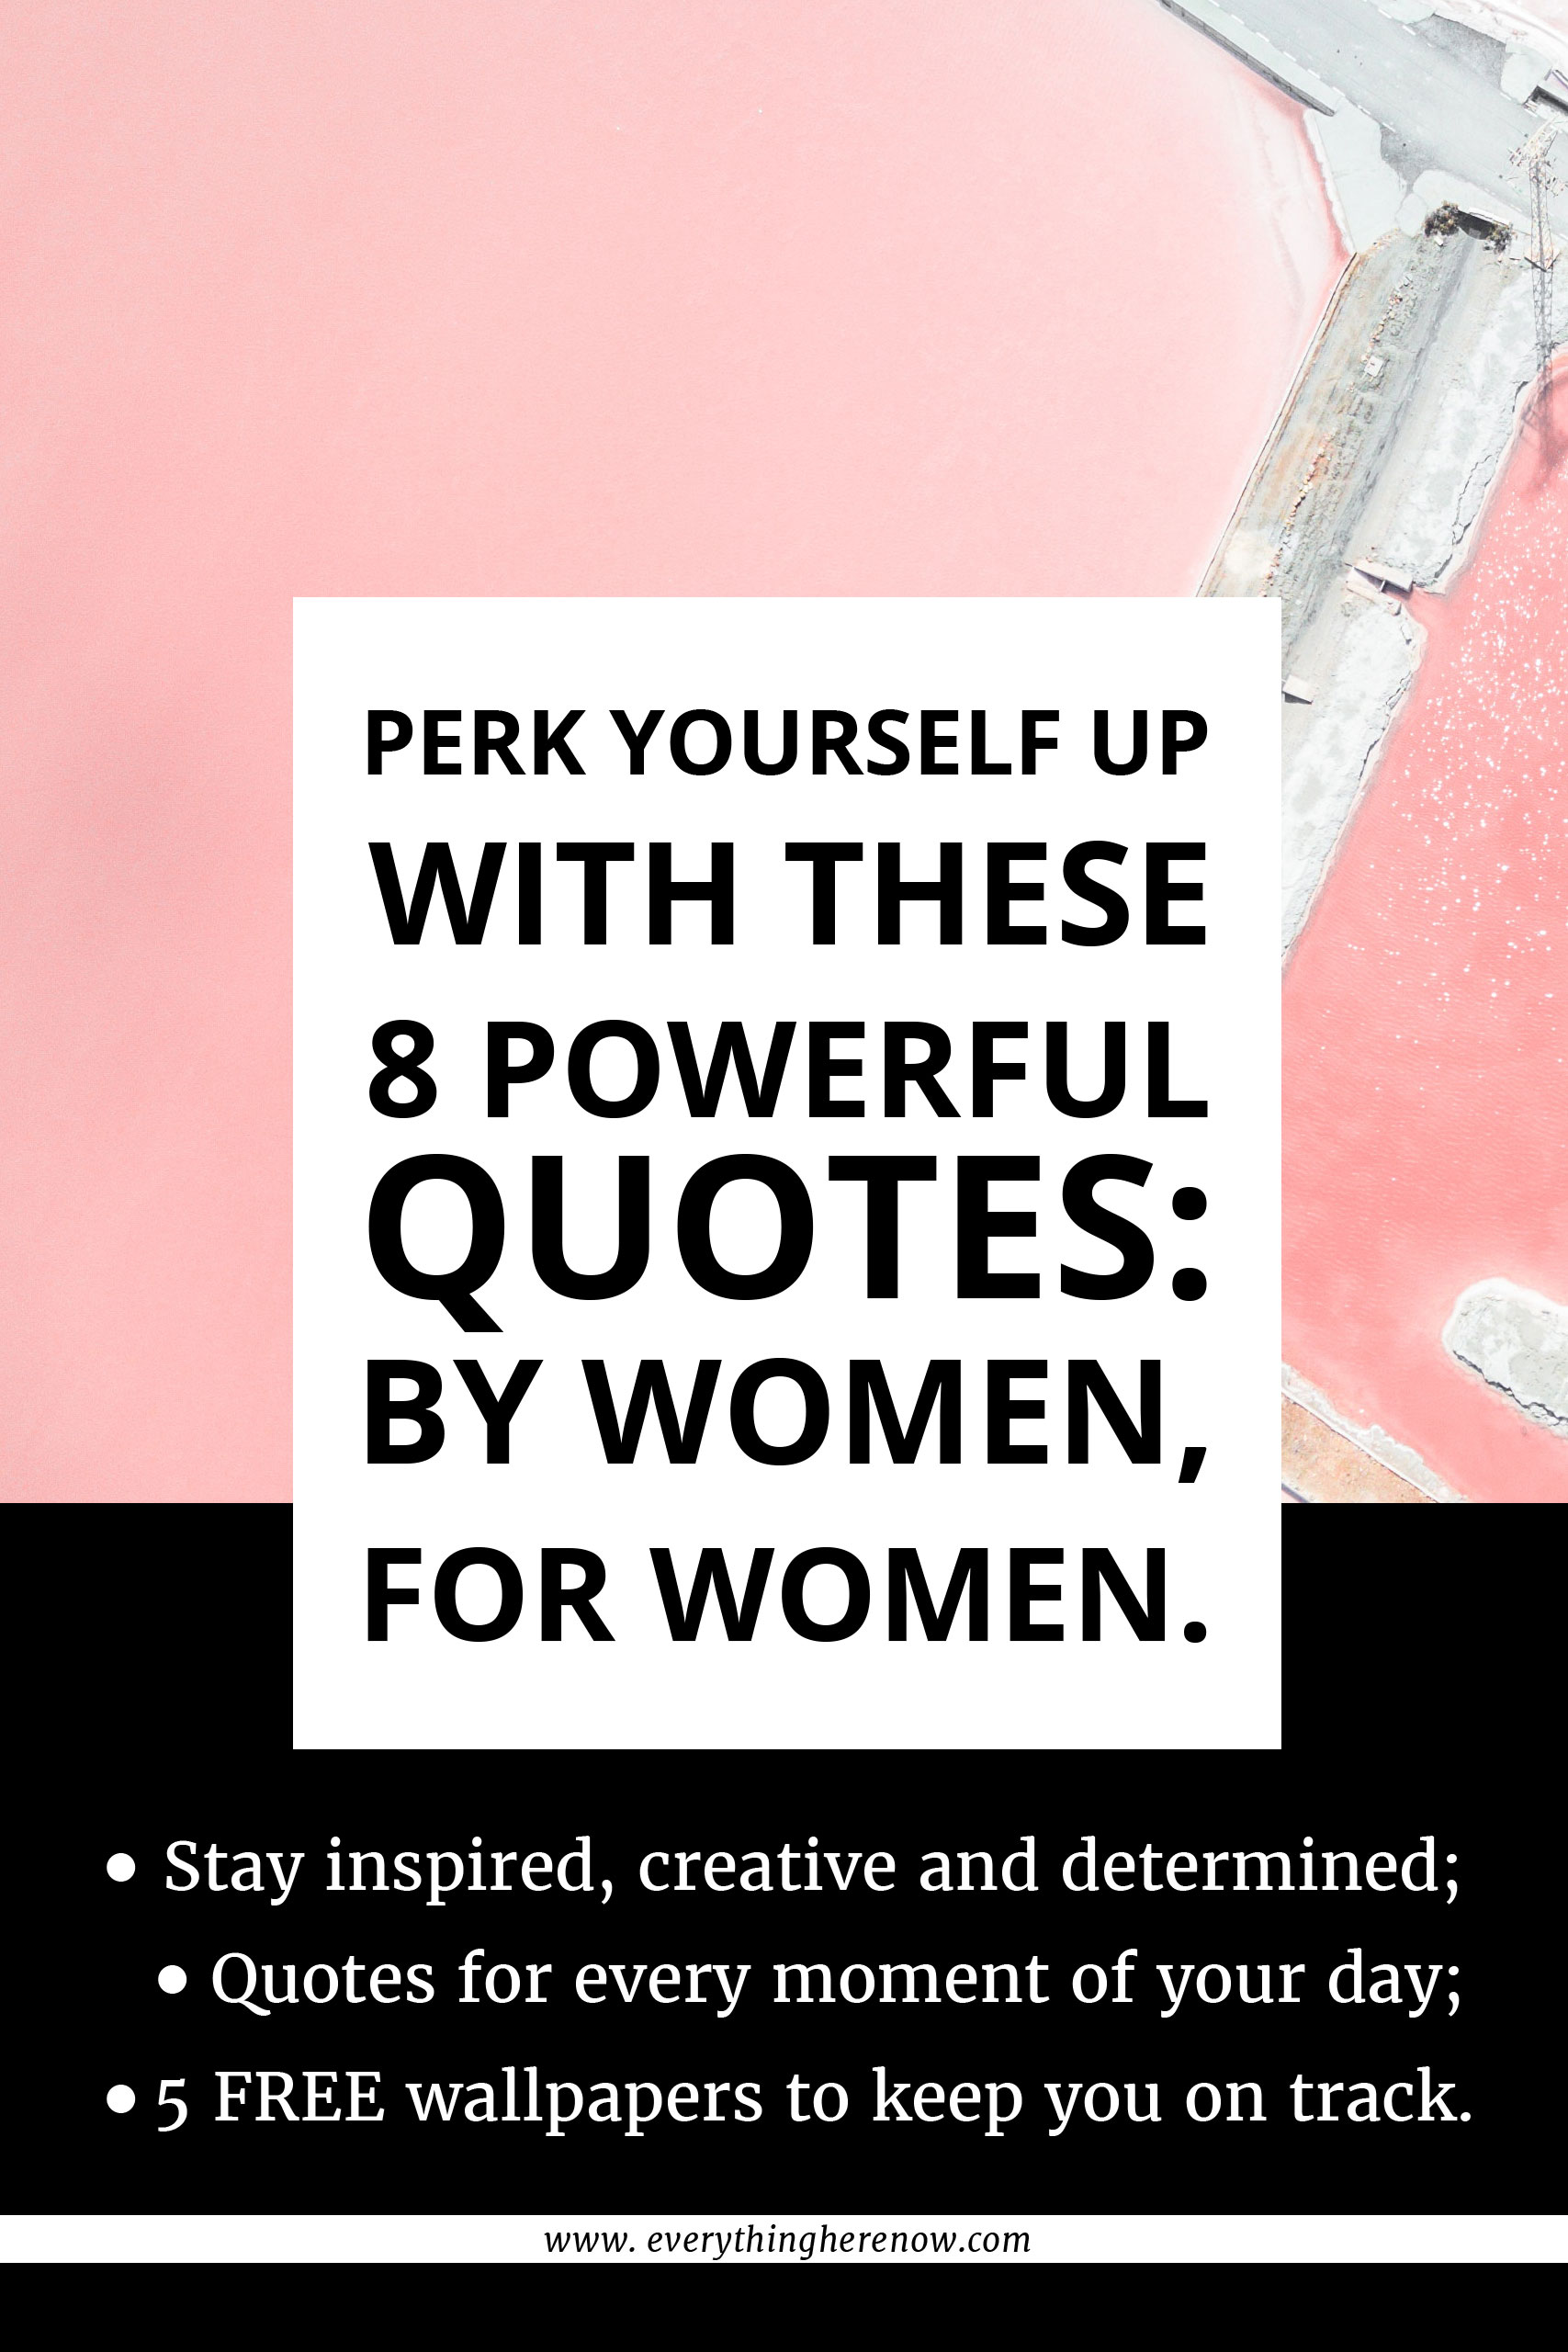 Determined Woman Quotes (+ 5 FREE wallpaper!) Here Now